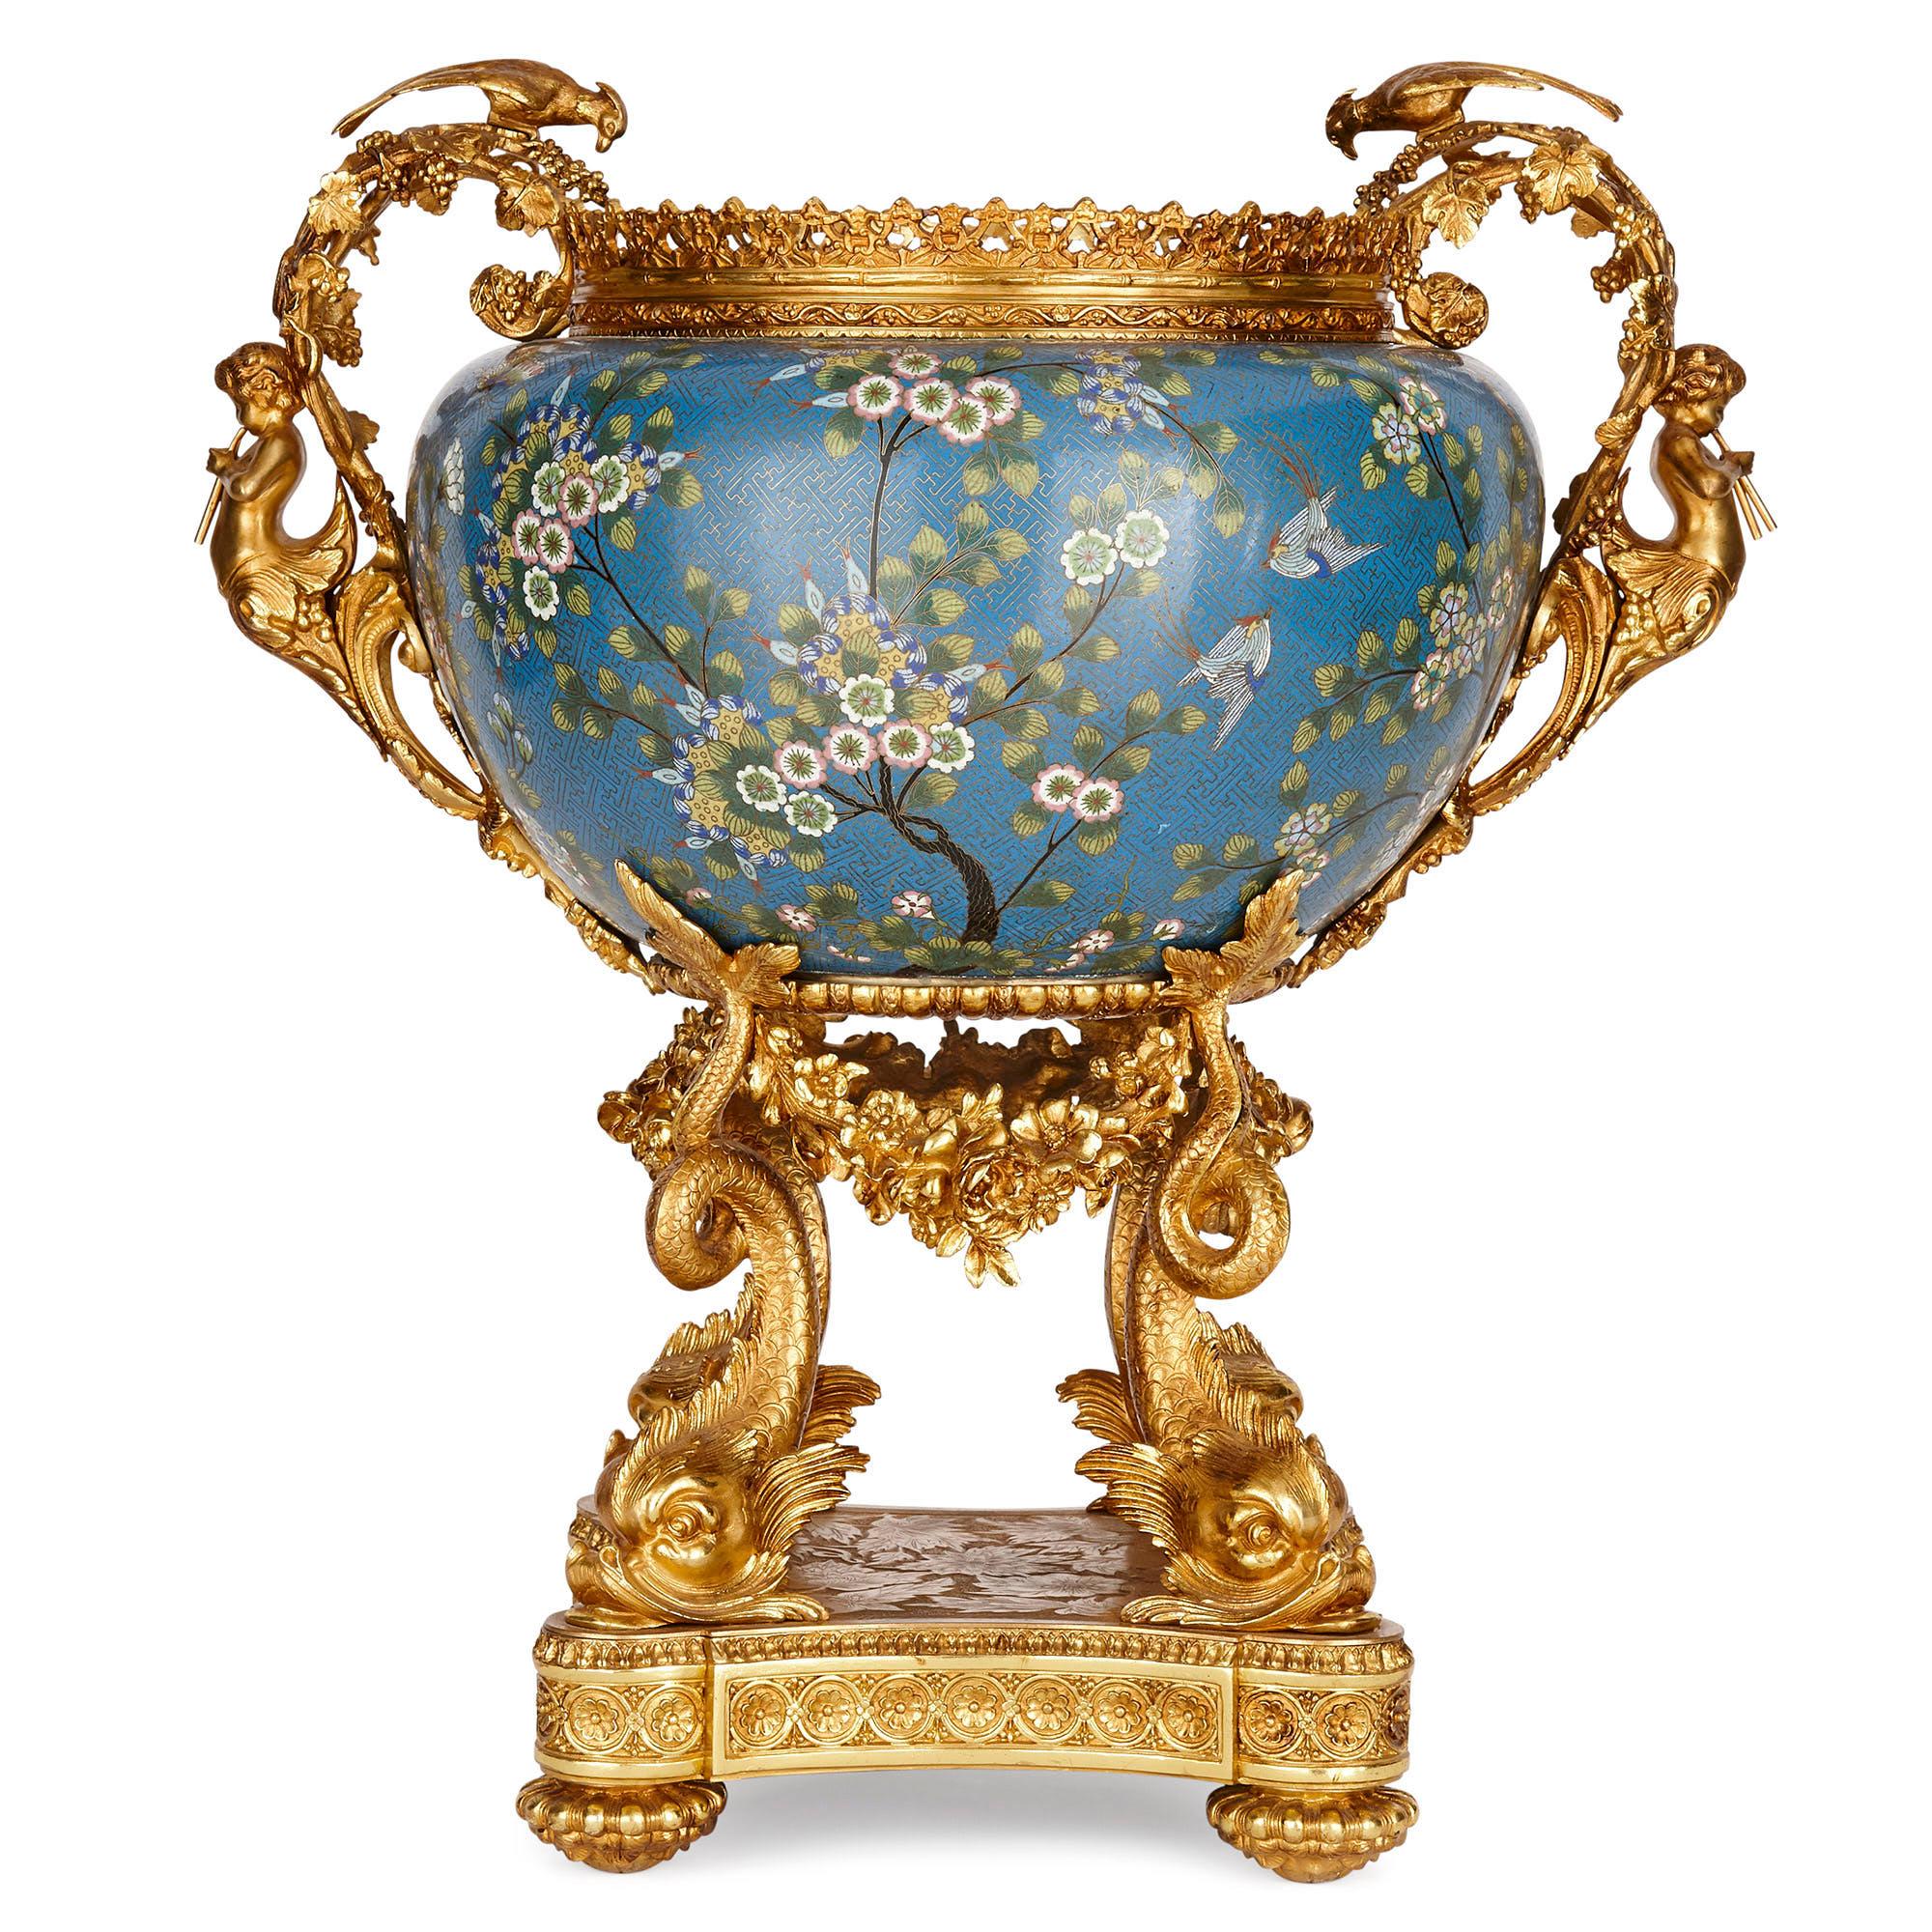 French gilt bronze and Chinese cloisonné enamel jardinière
French and Chinese, early 20th century
Measures: Height 63cm, width 58cm, depth 40cm

This piece is a superb example of East meets West: of Chinese cloisonné enamel paired with French